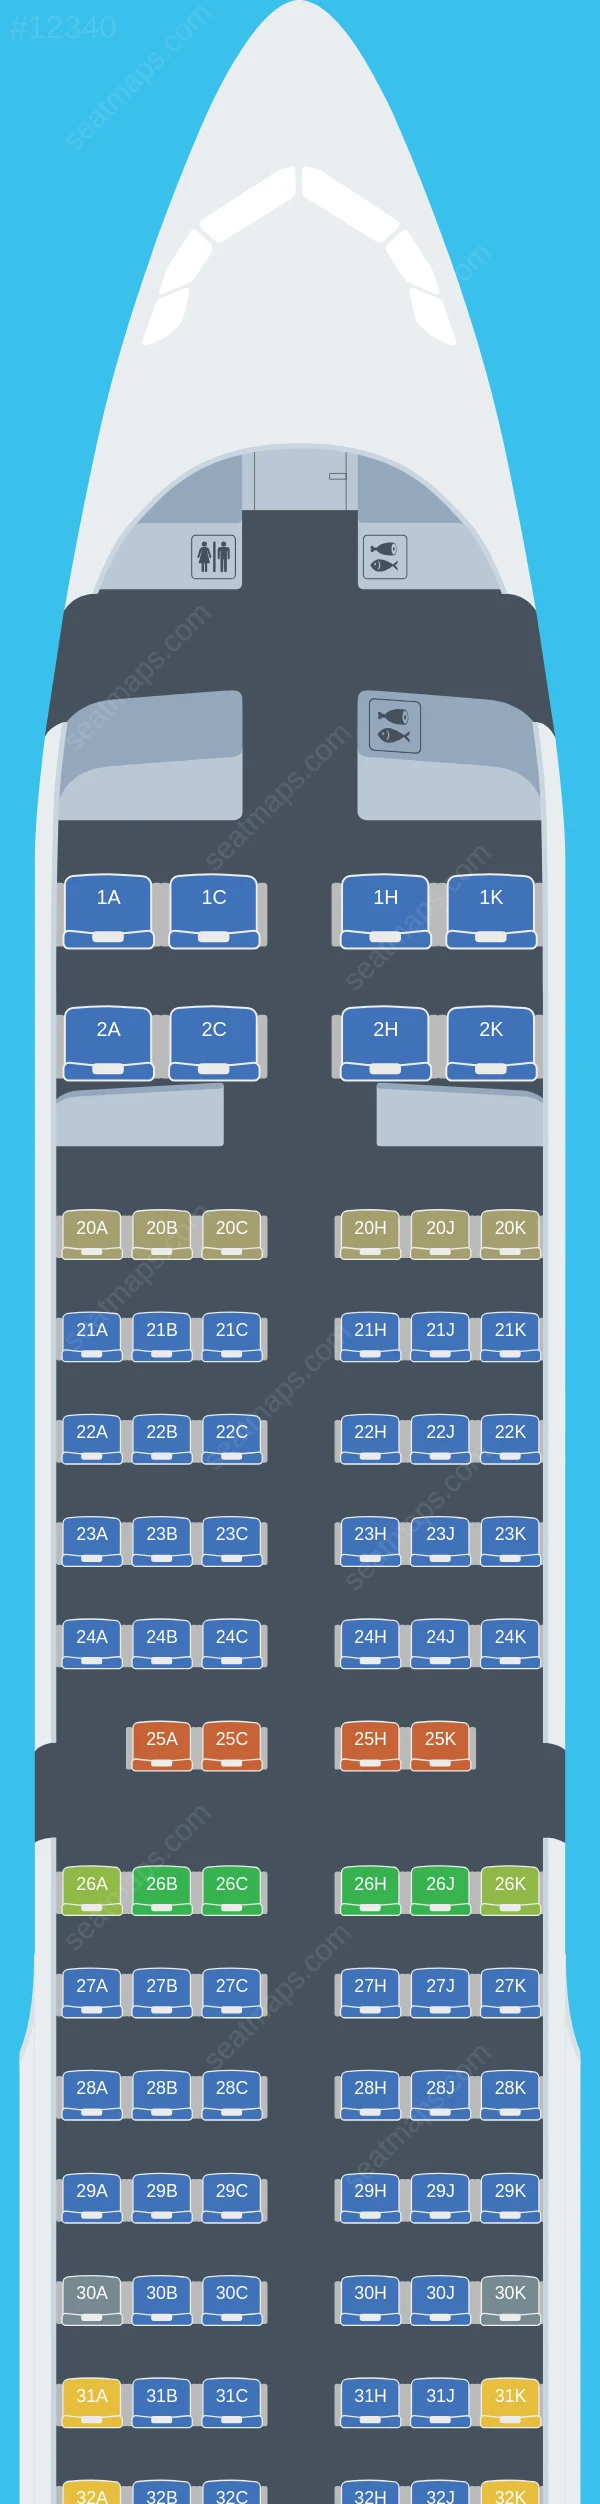 Bamboo Airways Airbus A321-200 V.2 seatmap preview